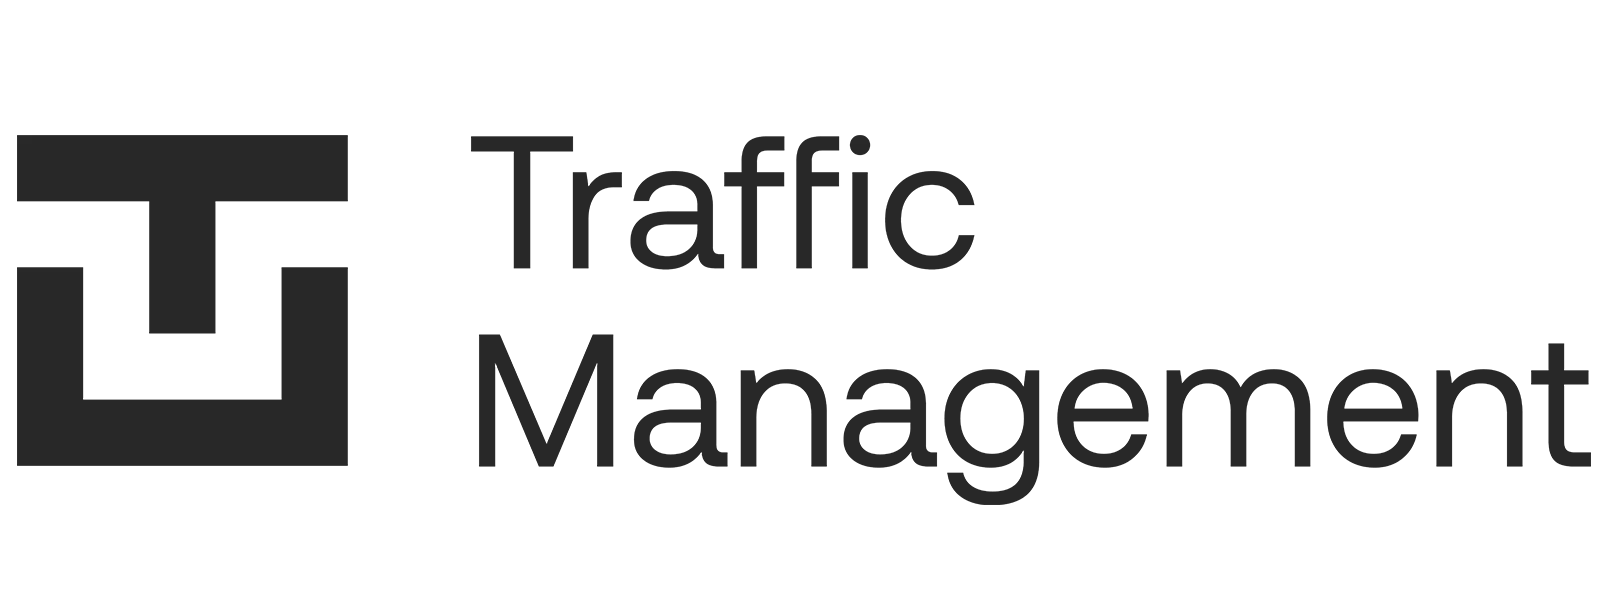 http://freedomworks.co.nz/traffic-management/